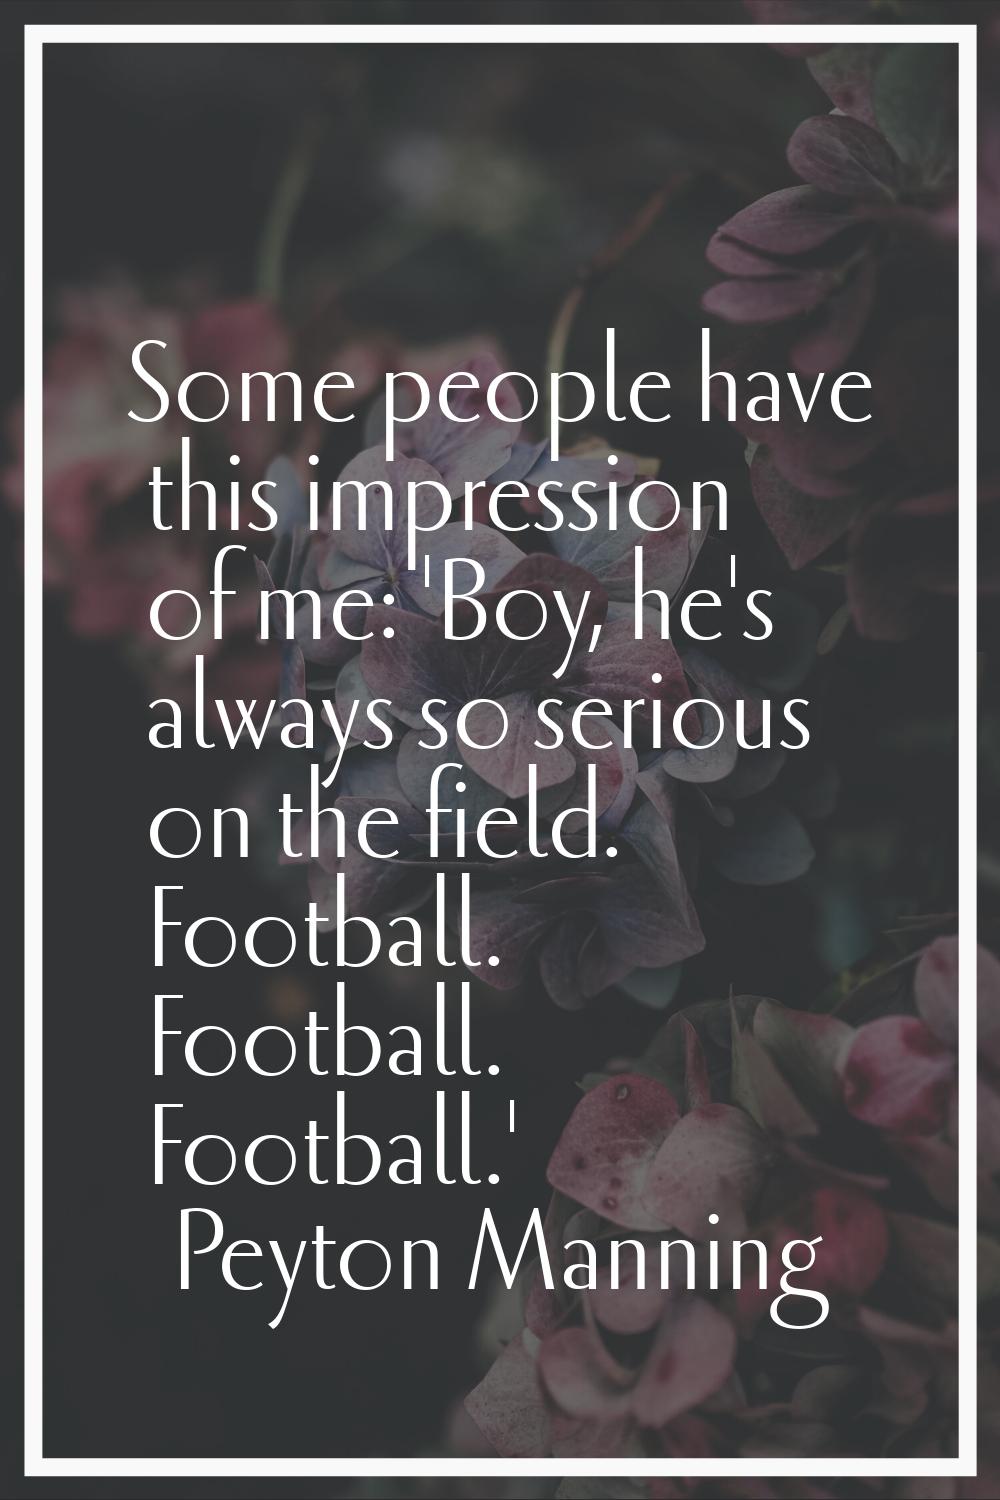 Some people have this impression of me: 'Boy, he's always so serious on the field. Football. Footba